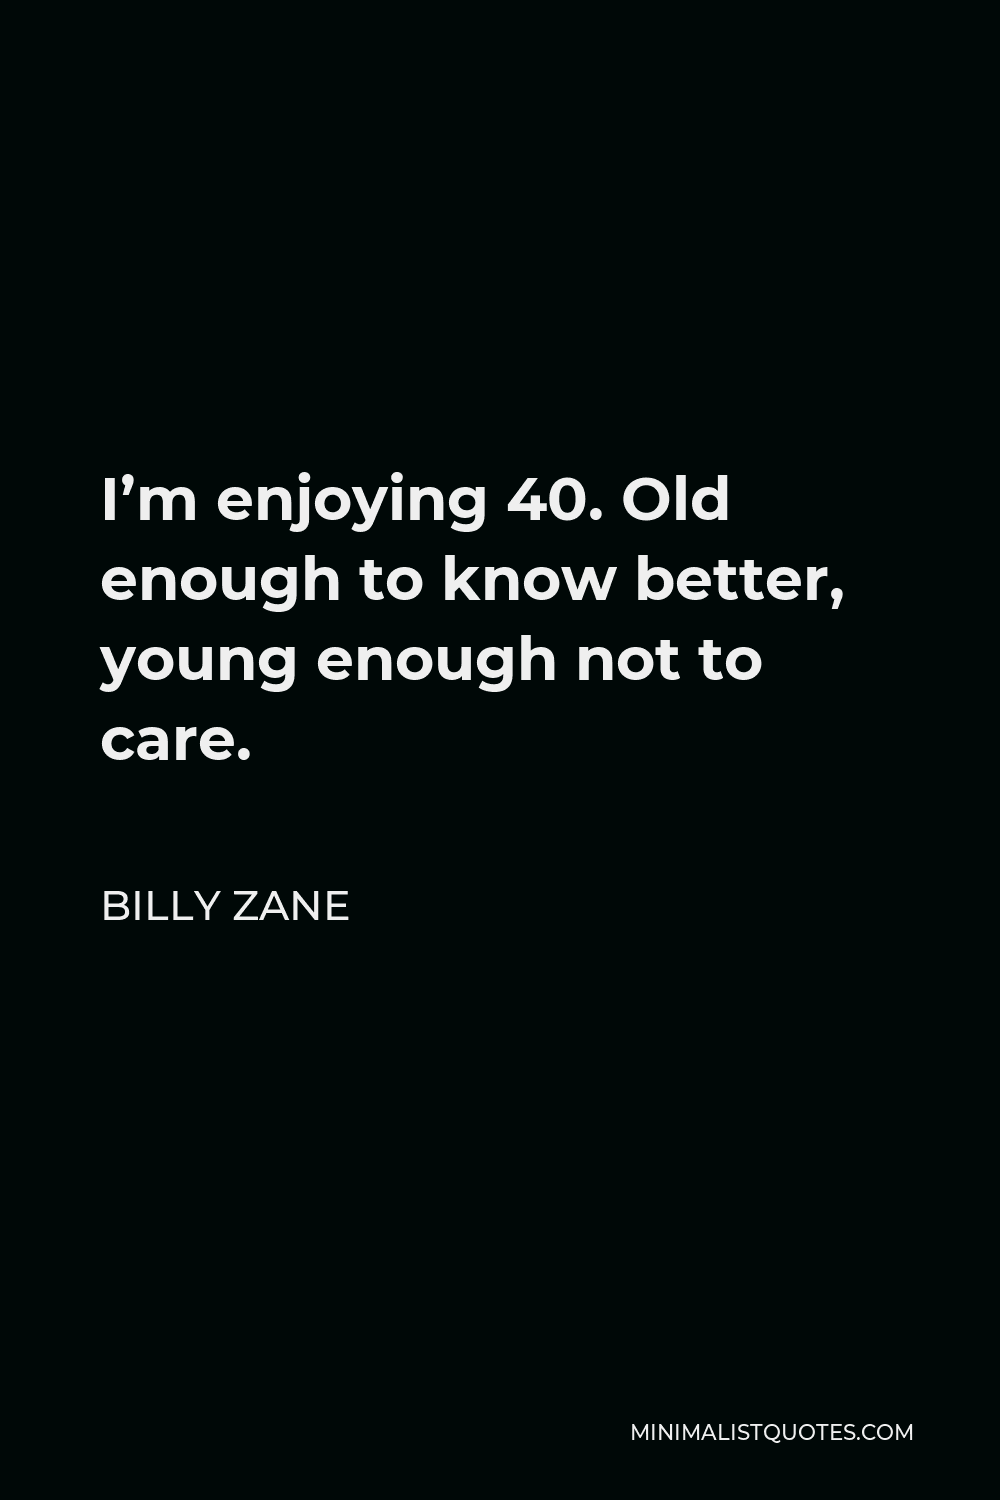 Billy Zane Quote - I’m enjoying 40. Old enough to know better, young enough not to care.